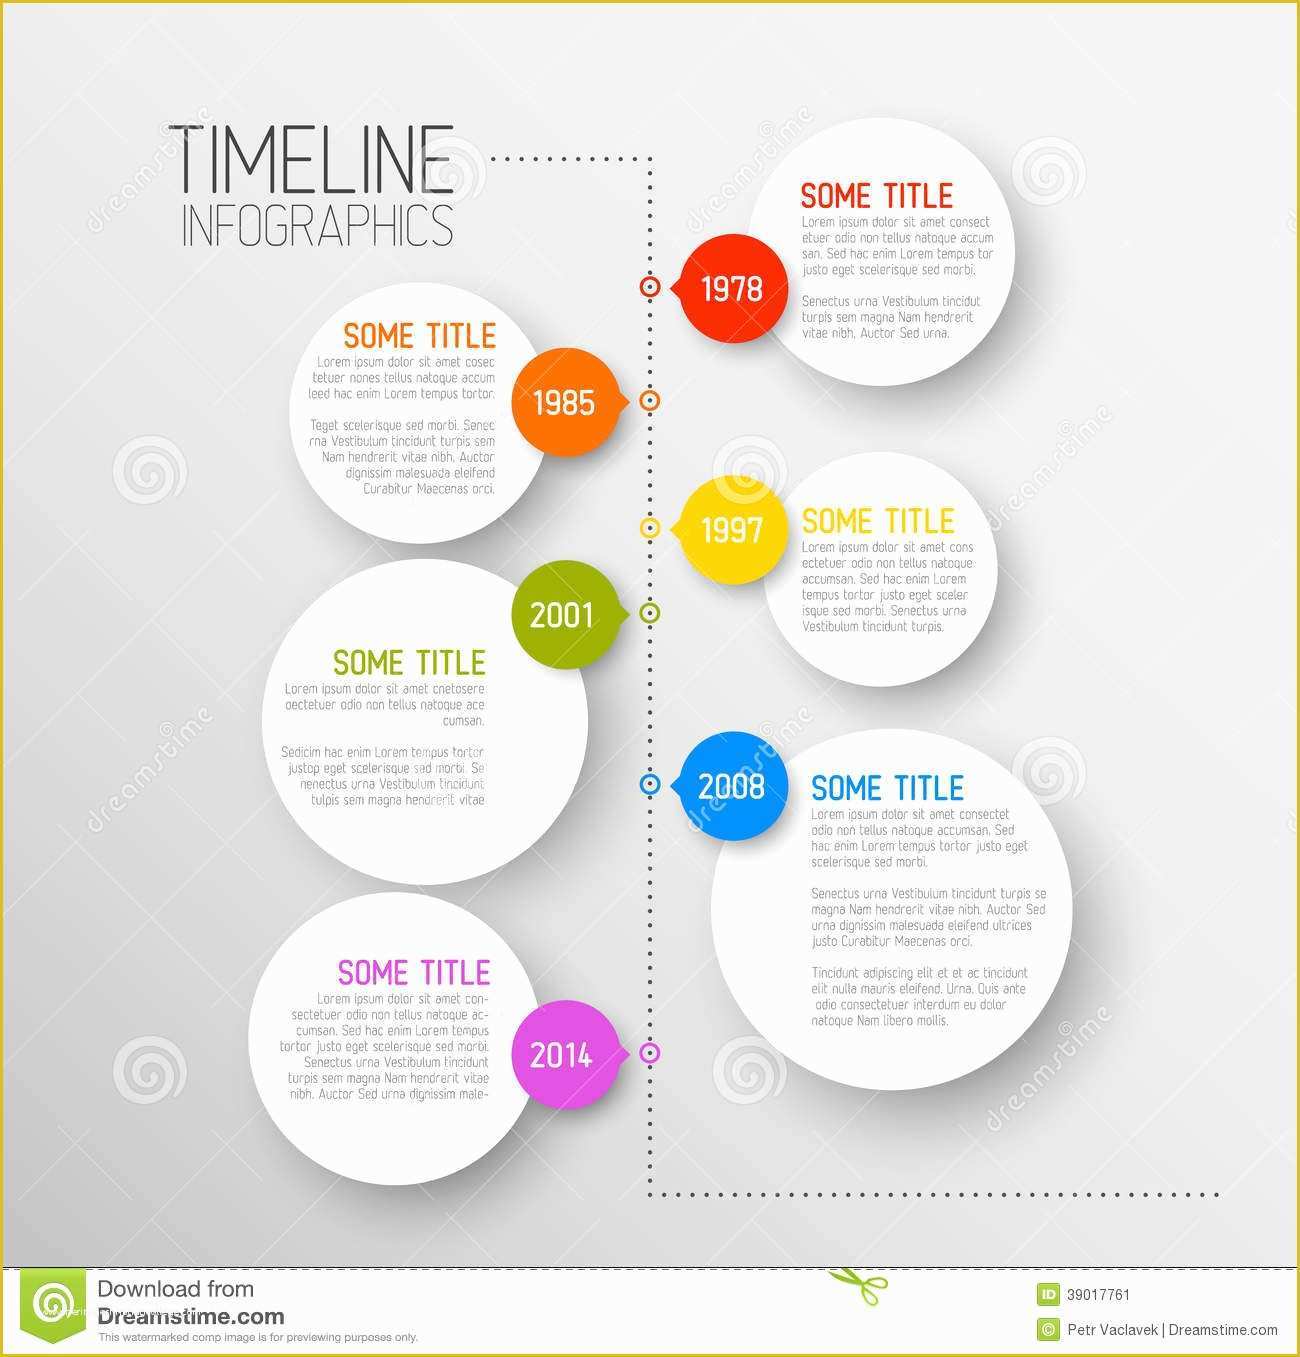 Microsoft Powerpoint Infographic Templates Free Of Infographic Template Category Page 1 Efoza